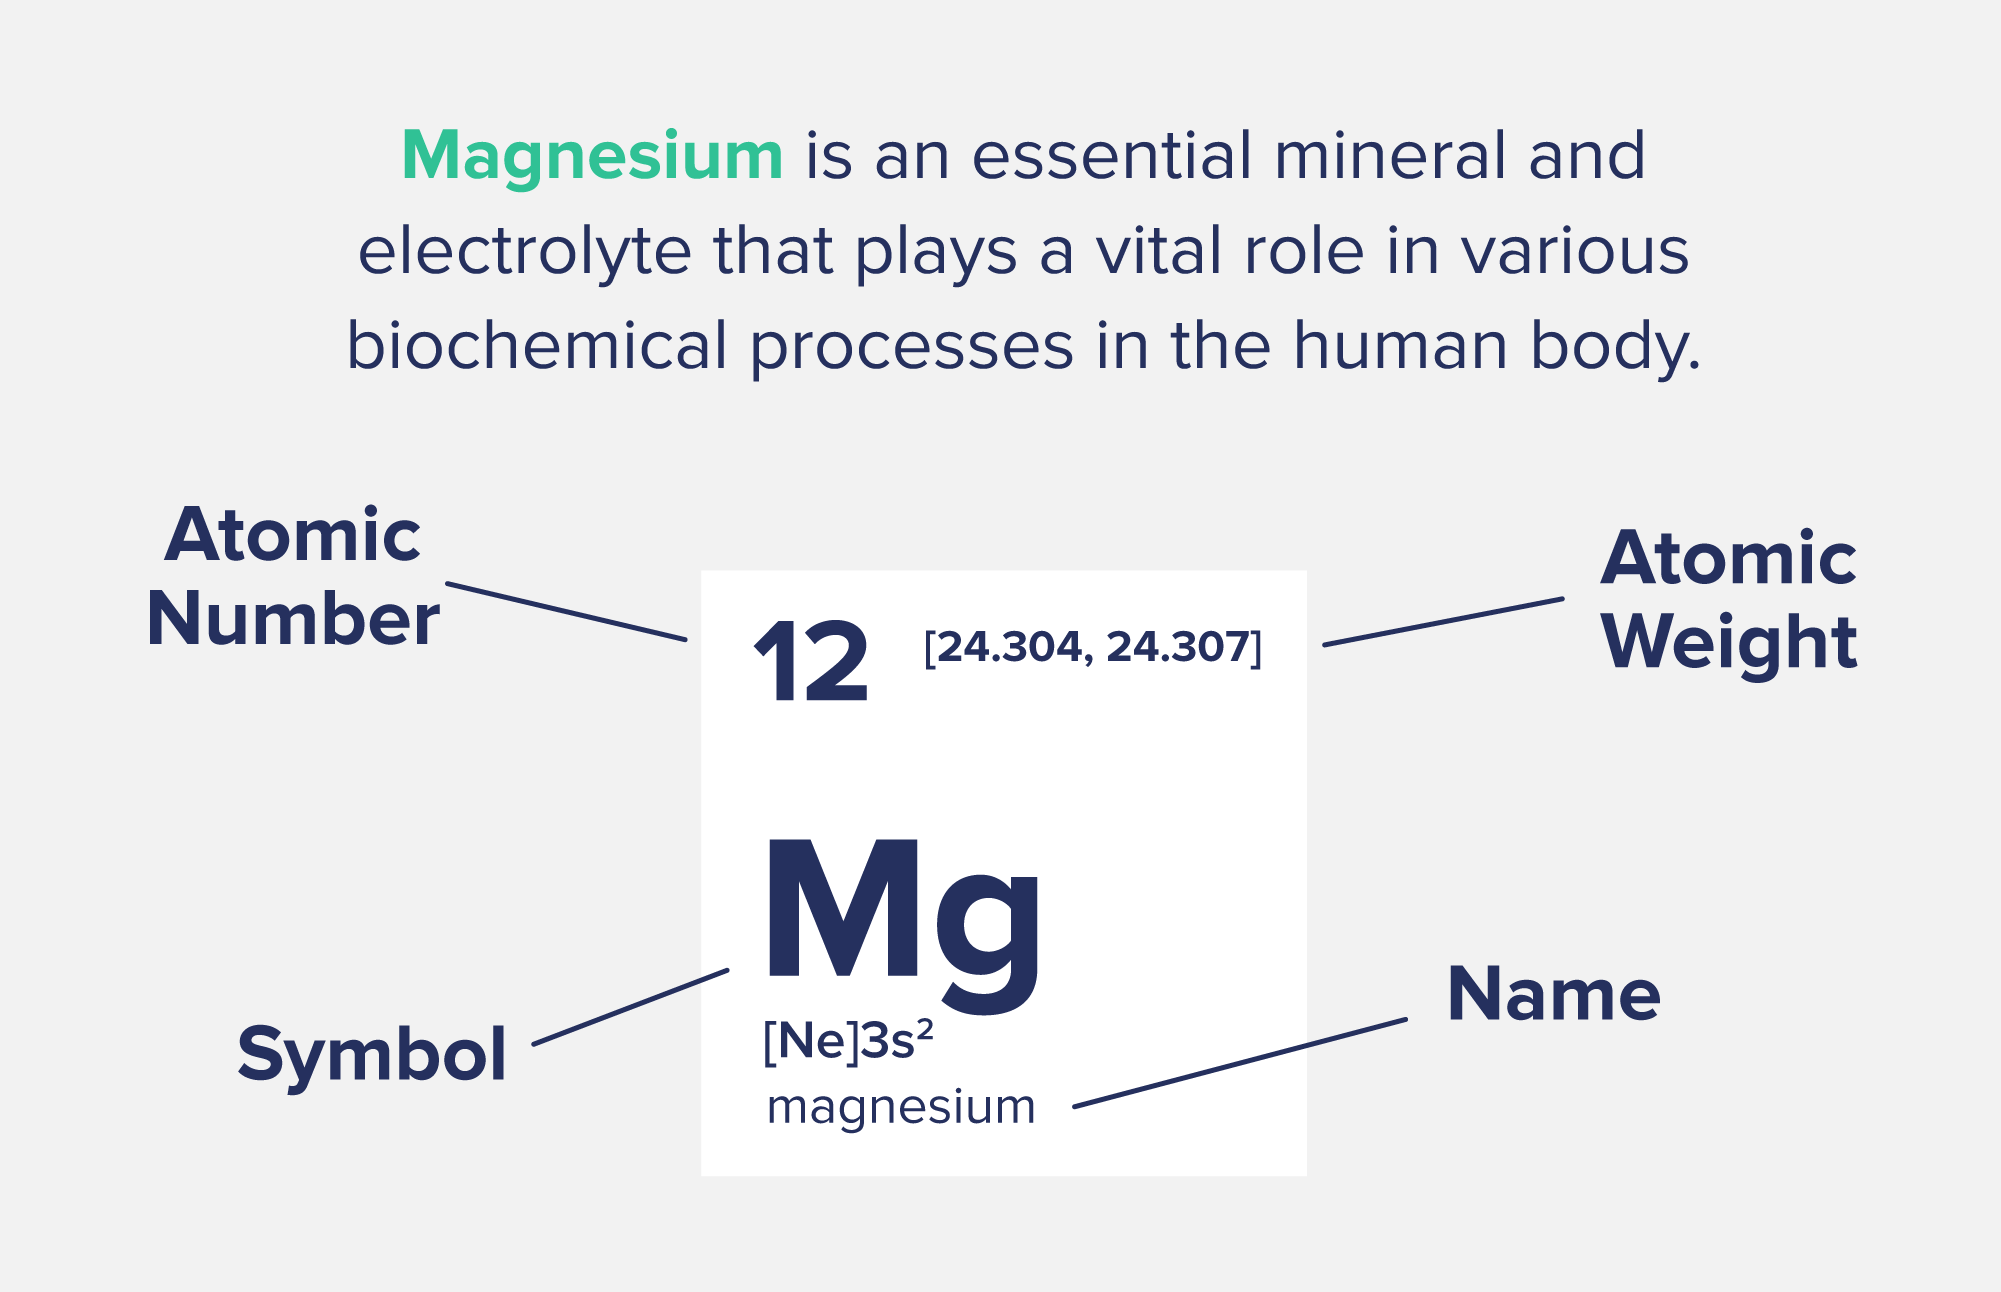 A graphic showing magnesium's location on the periodic table of elements. Magnesium is an essential mineral and electrolyte that plays a vital role in various biochemical processes in the human body. 